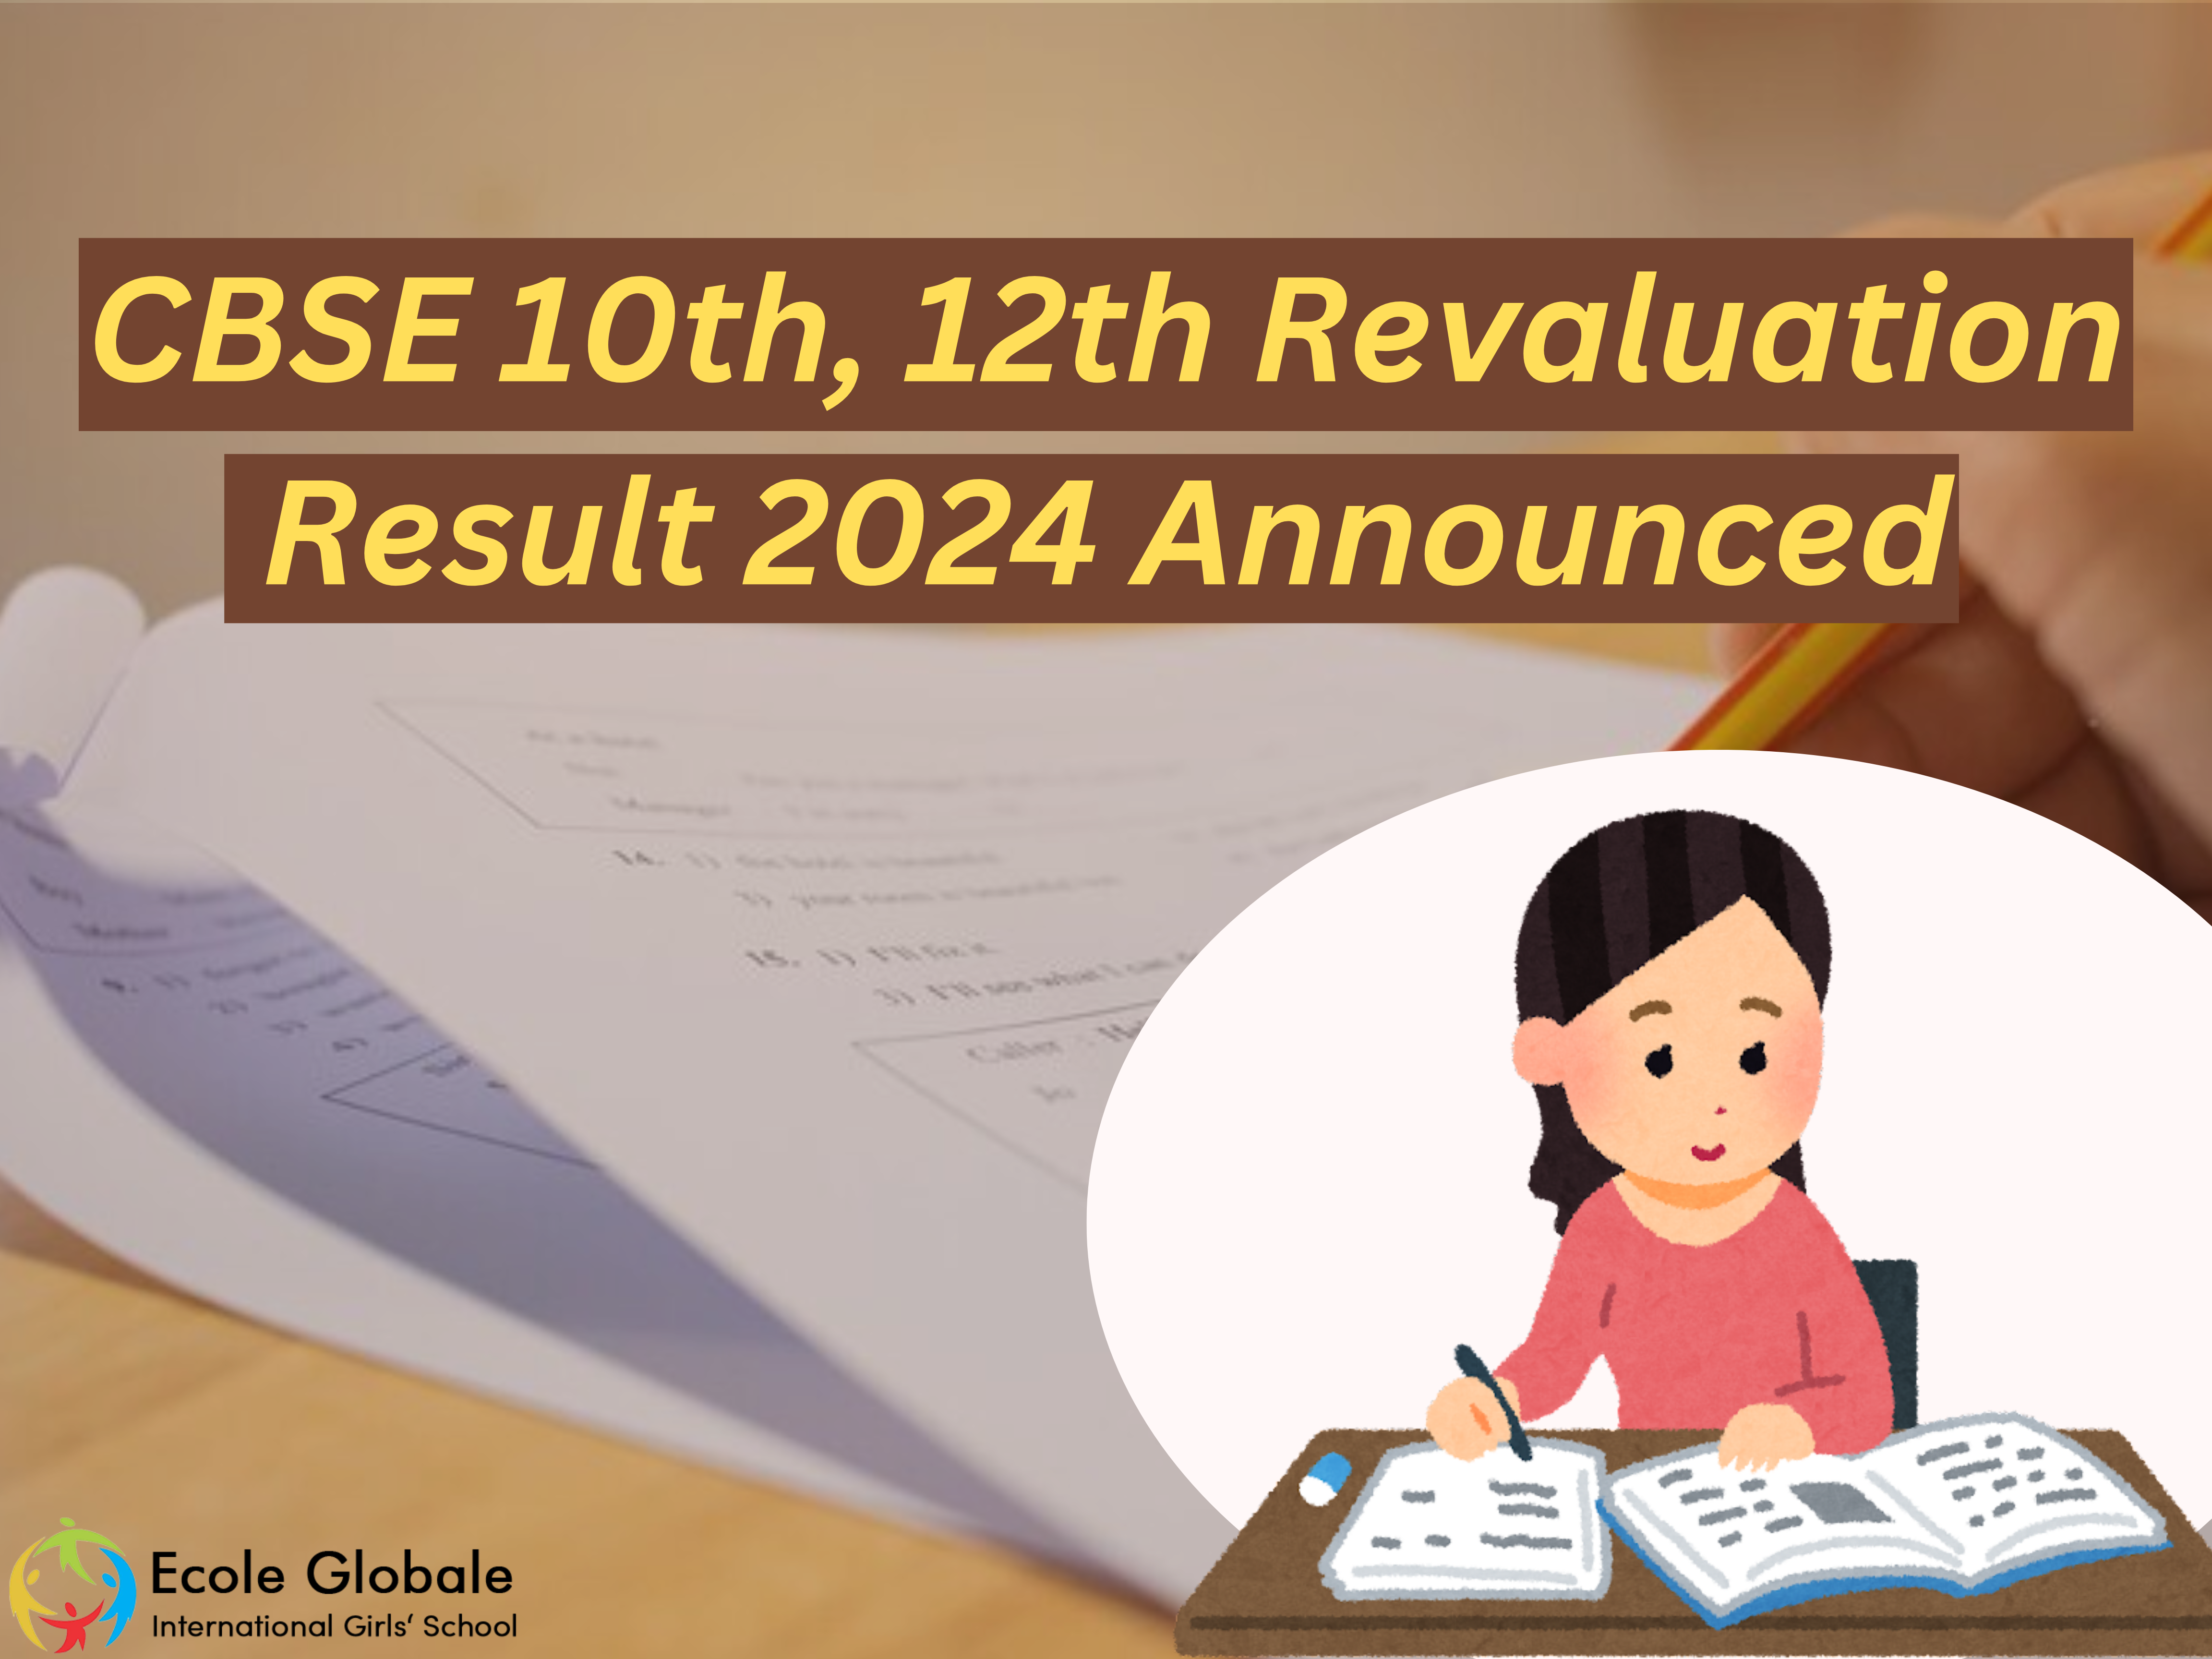 You are currently viewing CBSE 10th, 12th Revaluation Result 2024 Announced